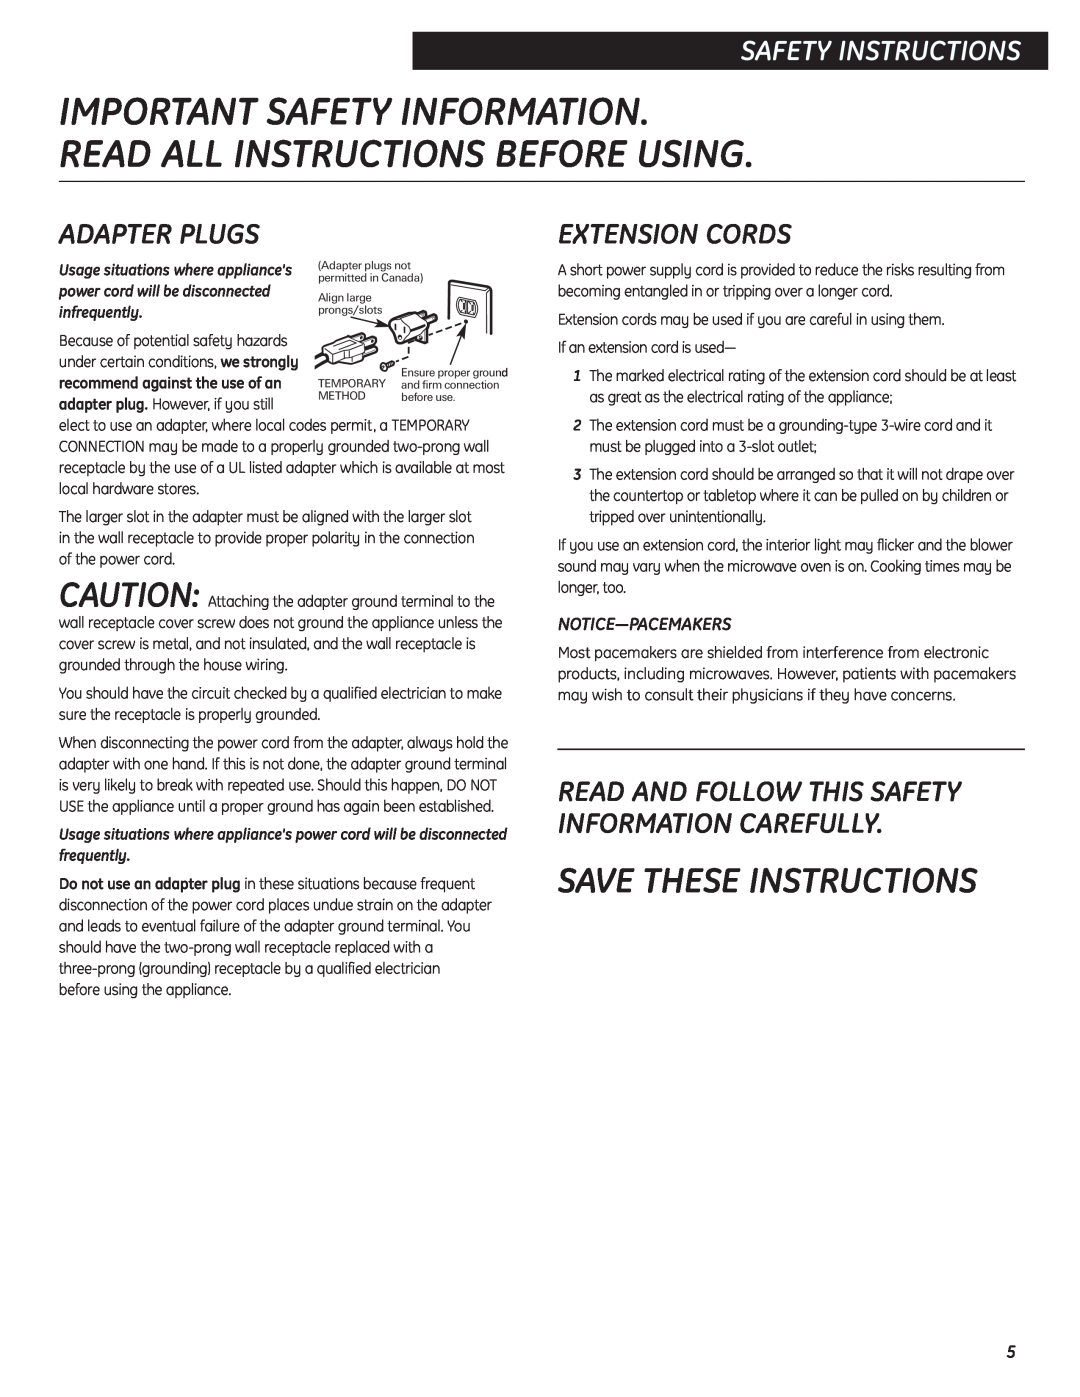 GE JES737 Save These Instructions, Adapter Plugs, Extension Cords, Notice-Pacemakers, Important Safety Information 